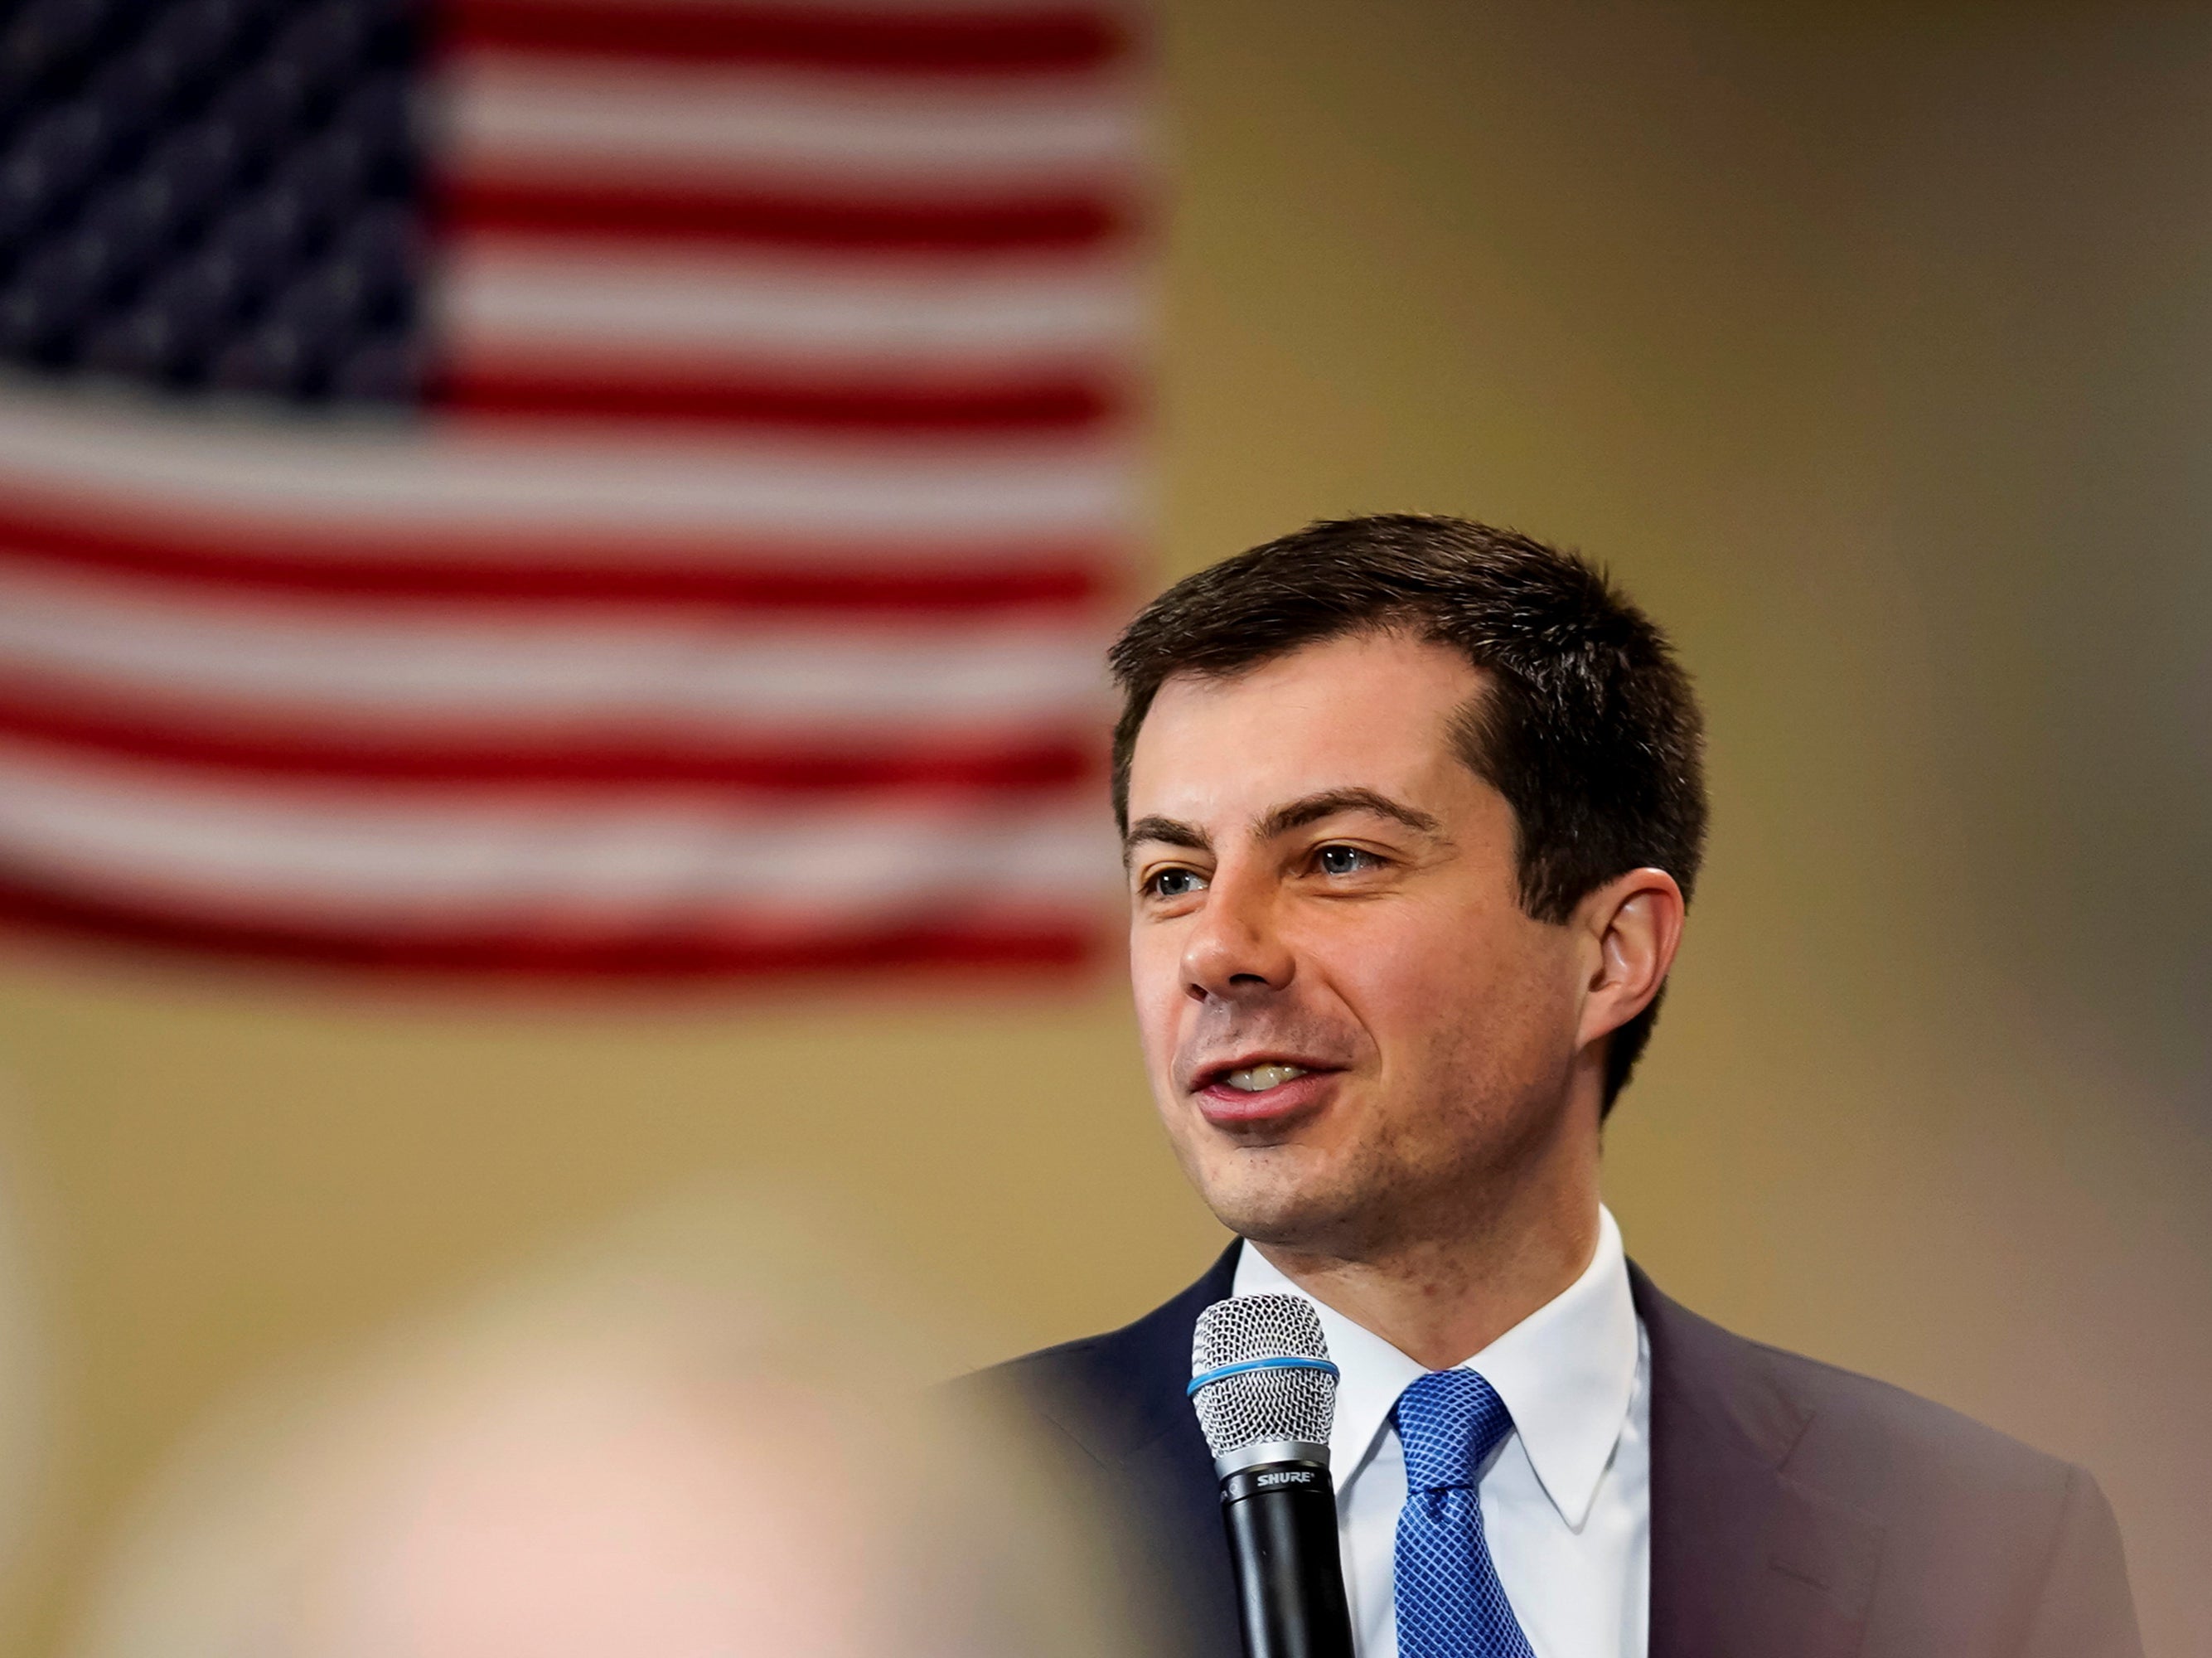 Stand-out LGBTQ members of Biden’s cabinet include openly gay Pete Buttigieg as transport secretary and openly trans Dr Rachel Levine as health secretary